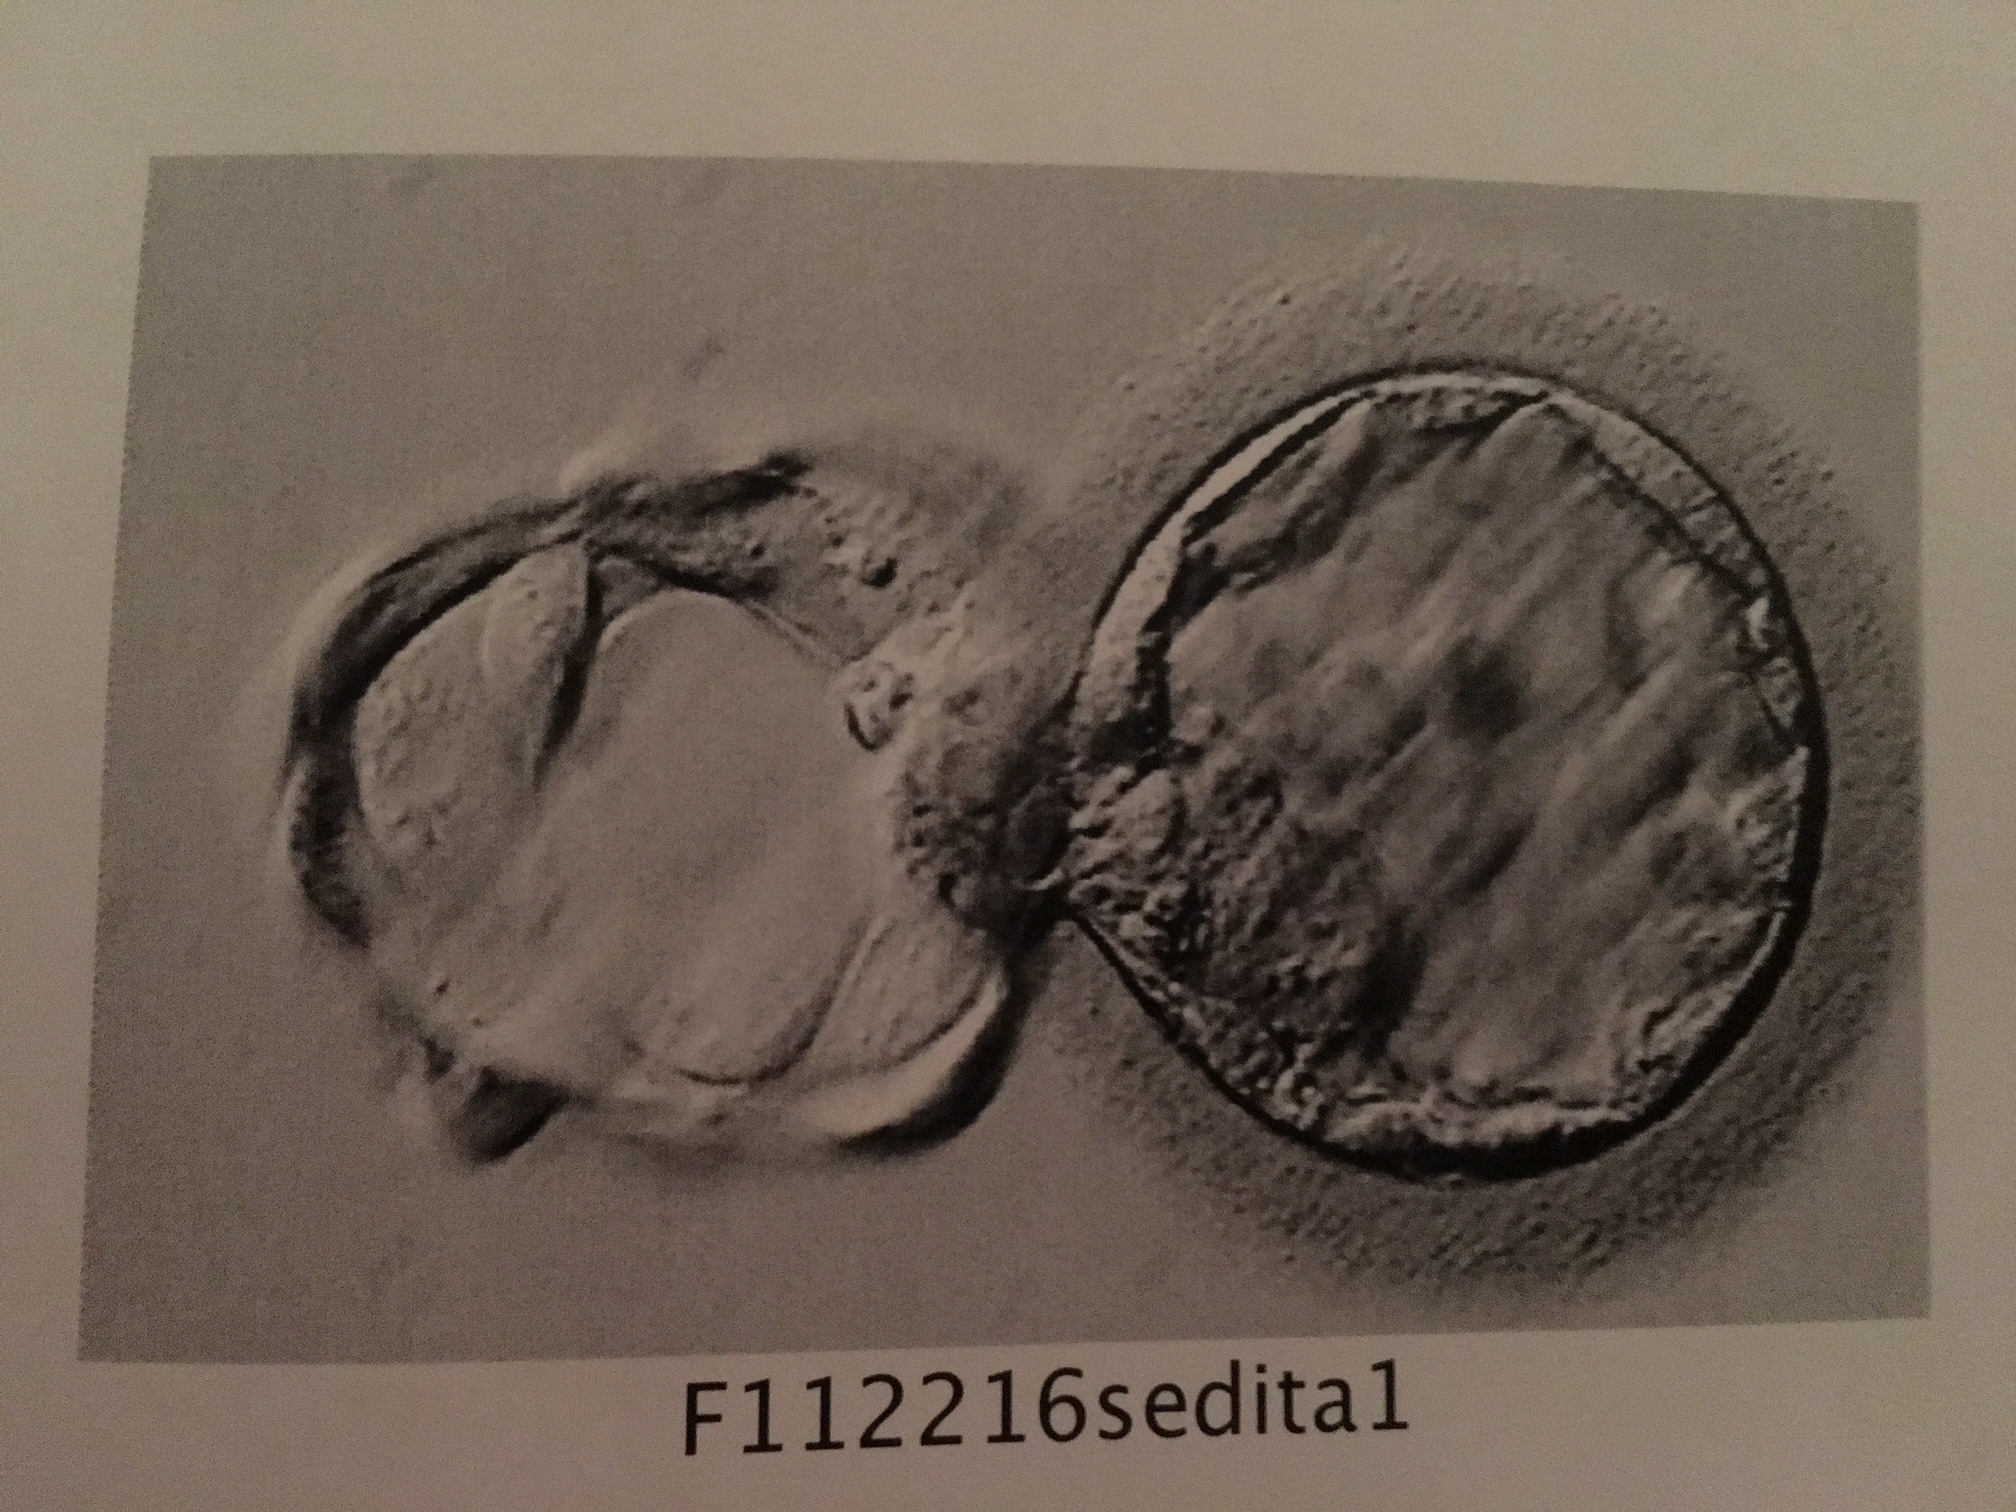 Photo of our embryo in its blastocyst stage